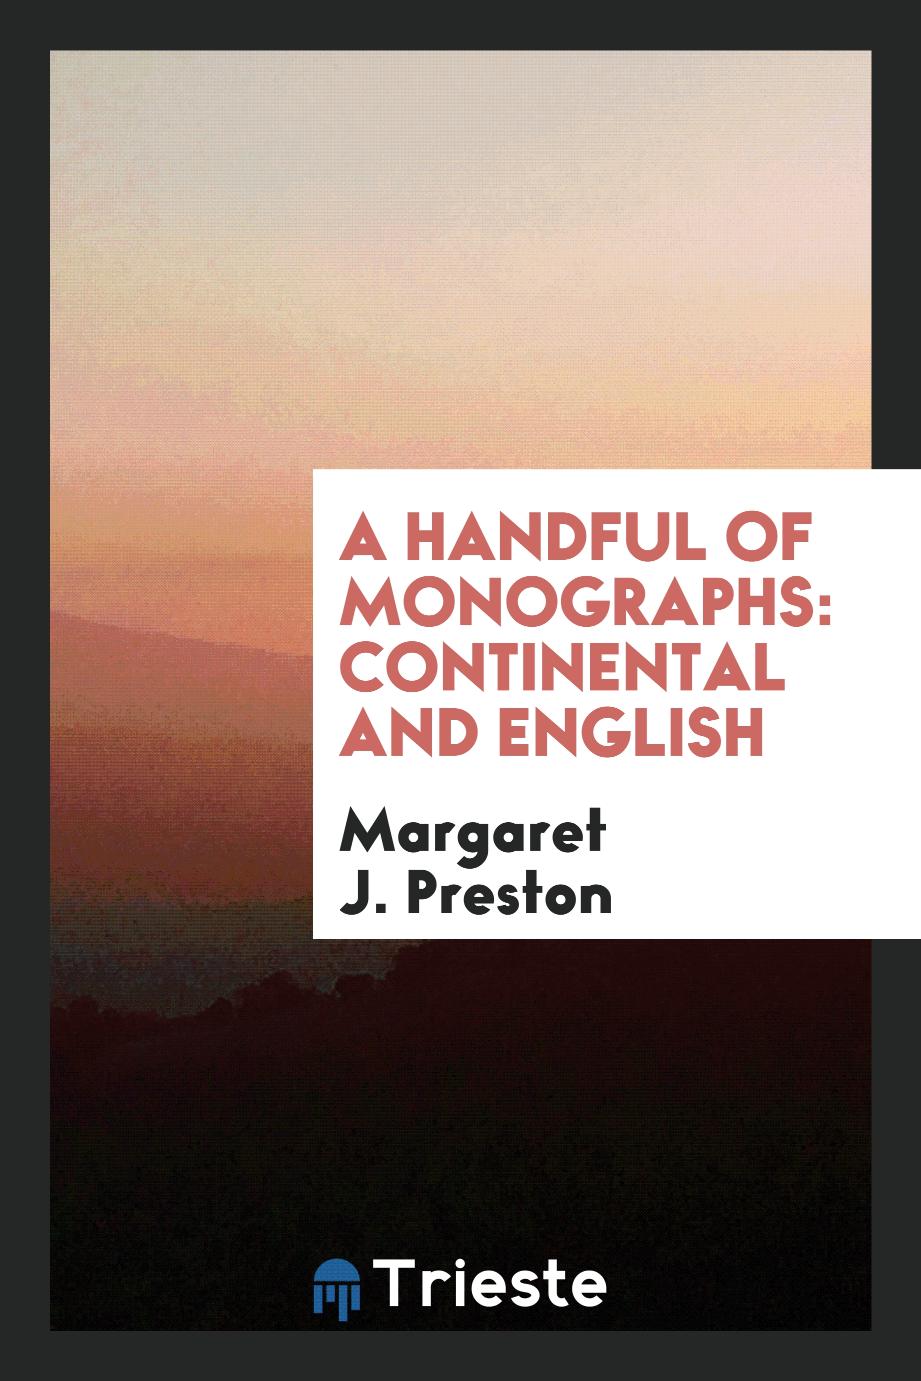 A Handful of Monographs: Continental and English